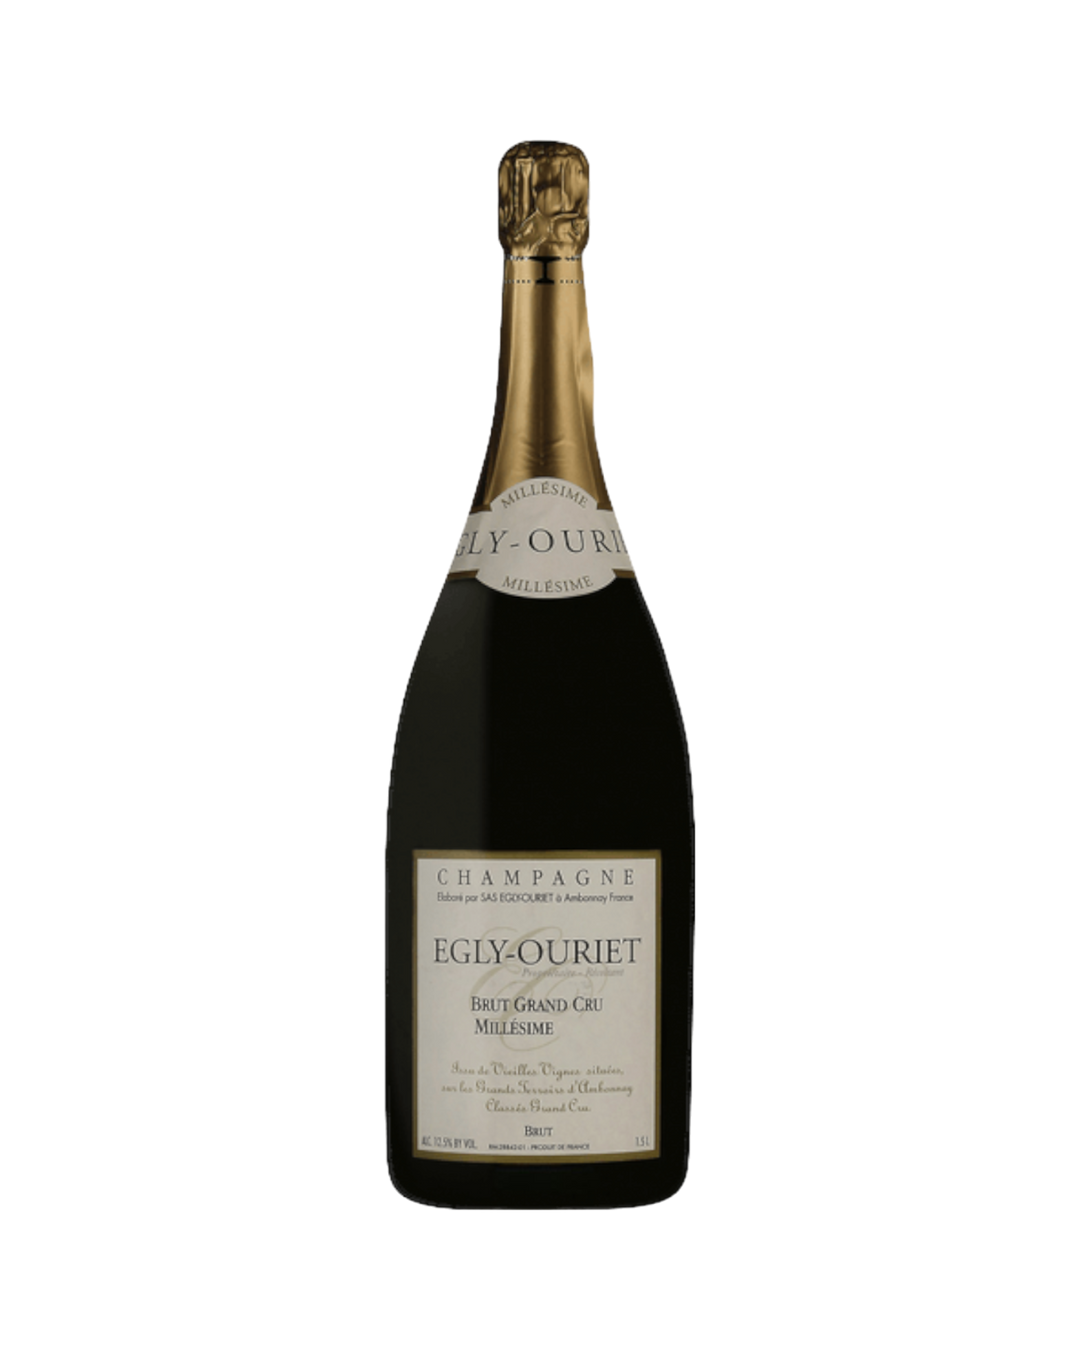 Egly-Ouriet Champagne Grand Cru Millésime